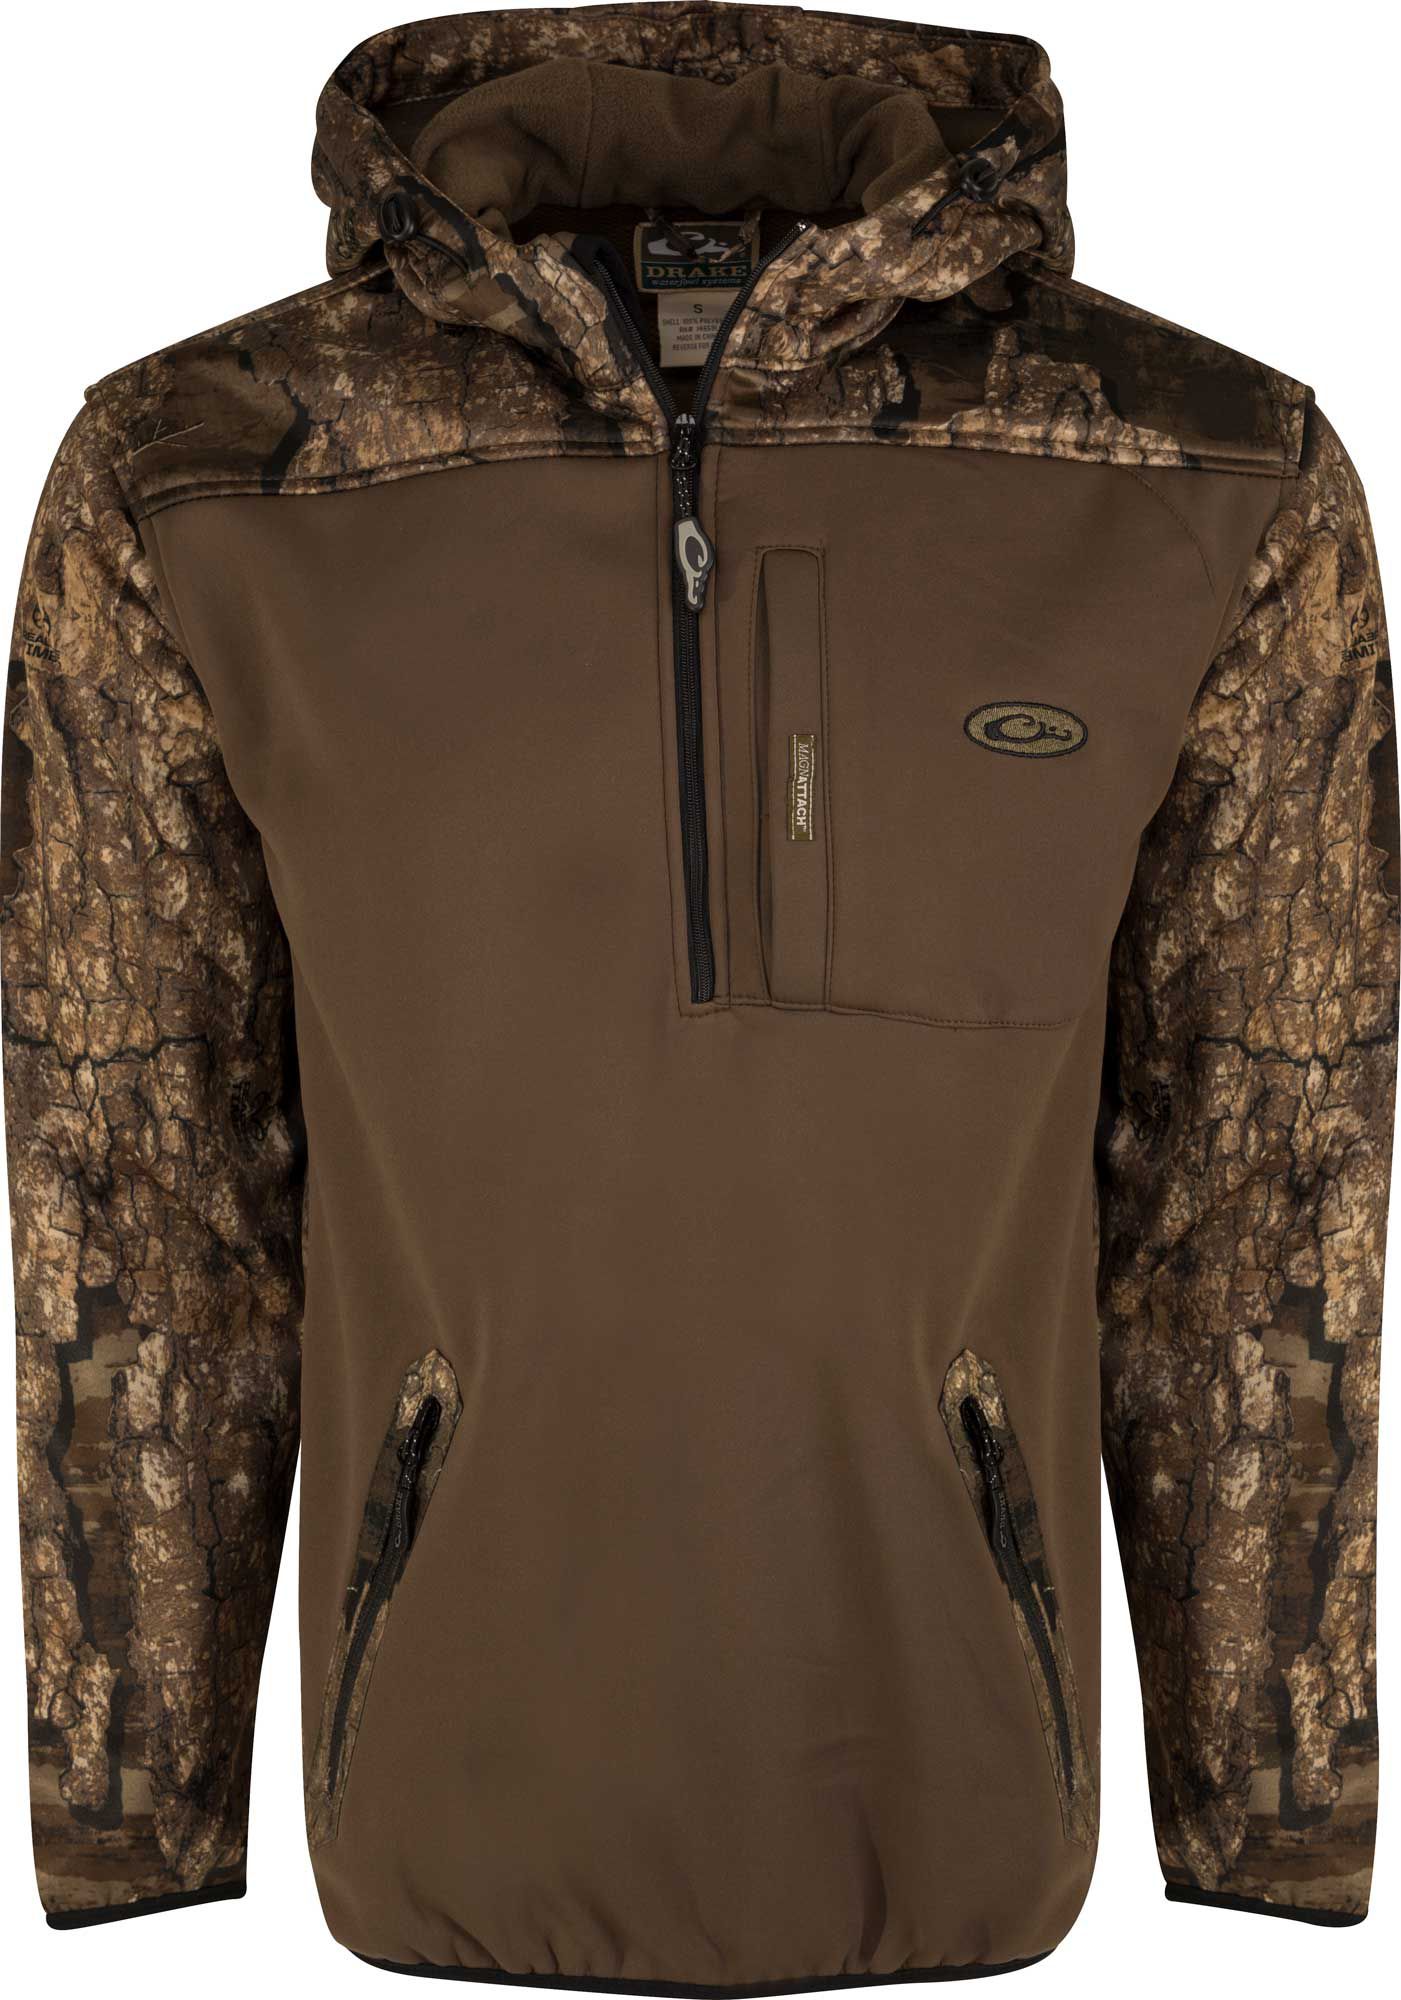 under armour duck hunting jacket